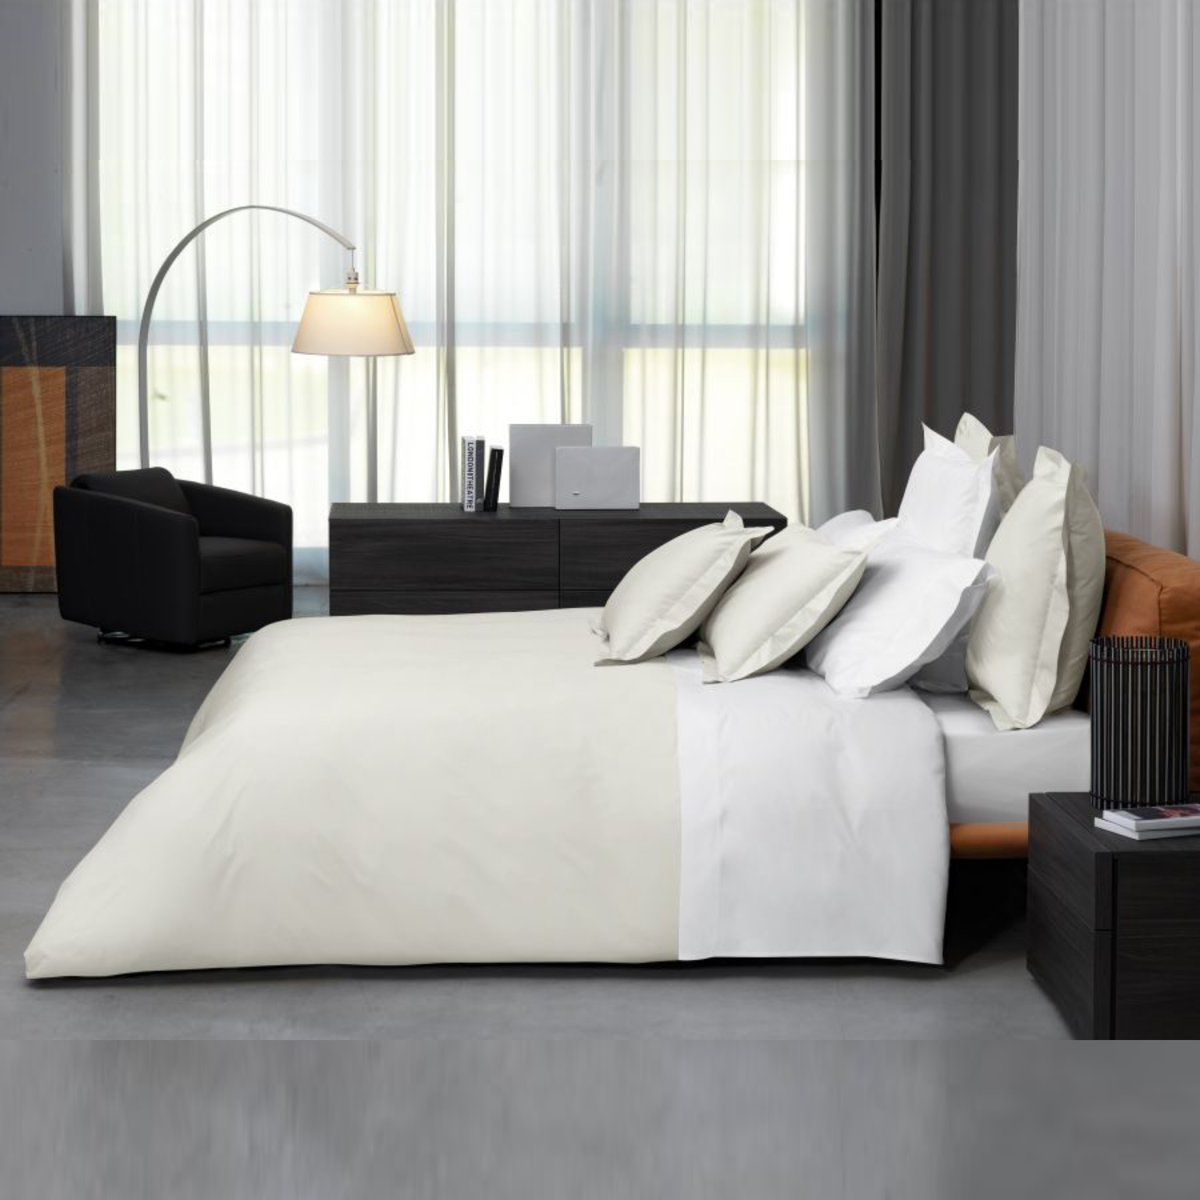 Full Bed Dressed in Signoria Gemma Bedding in Ivory Color